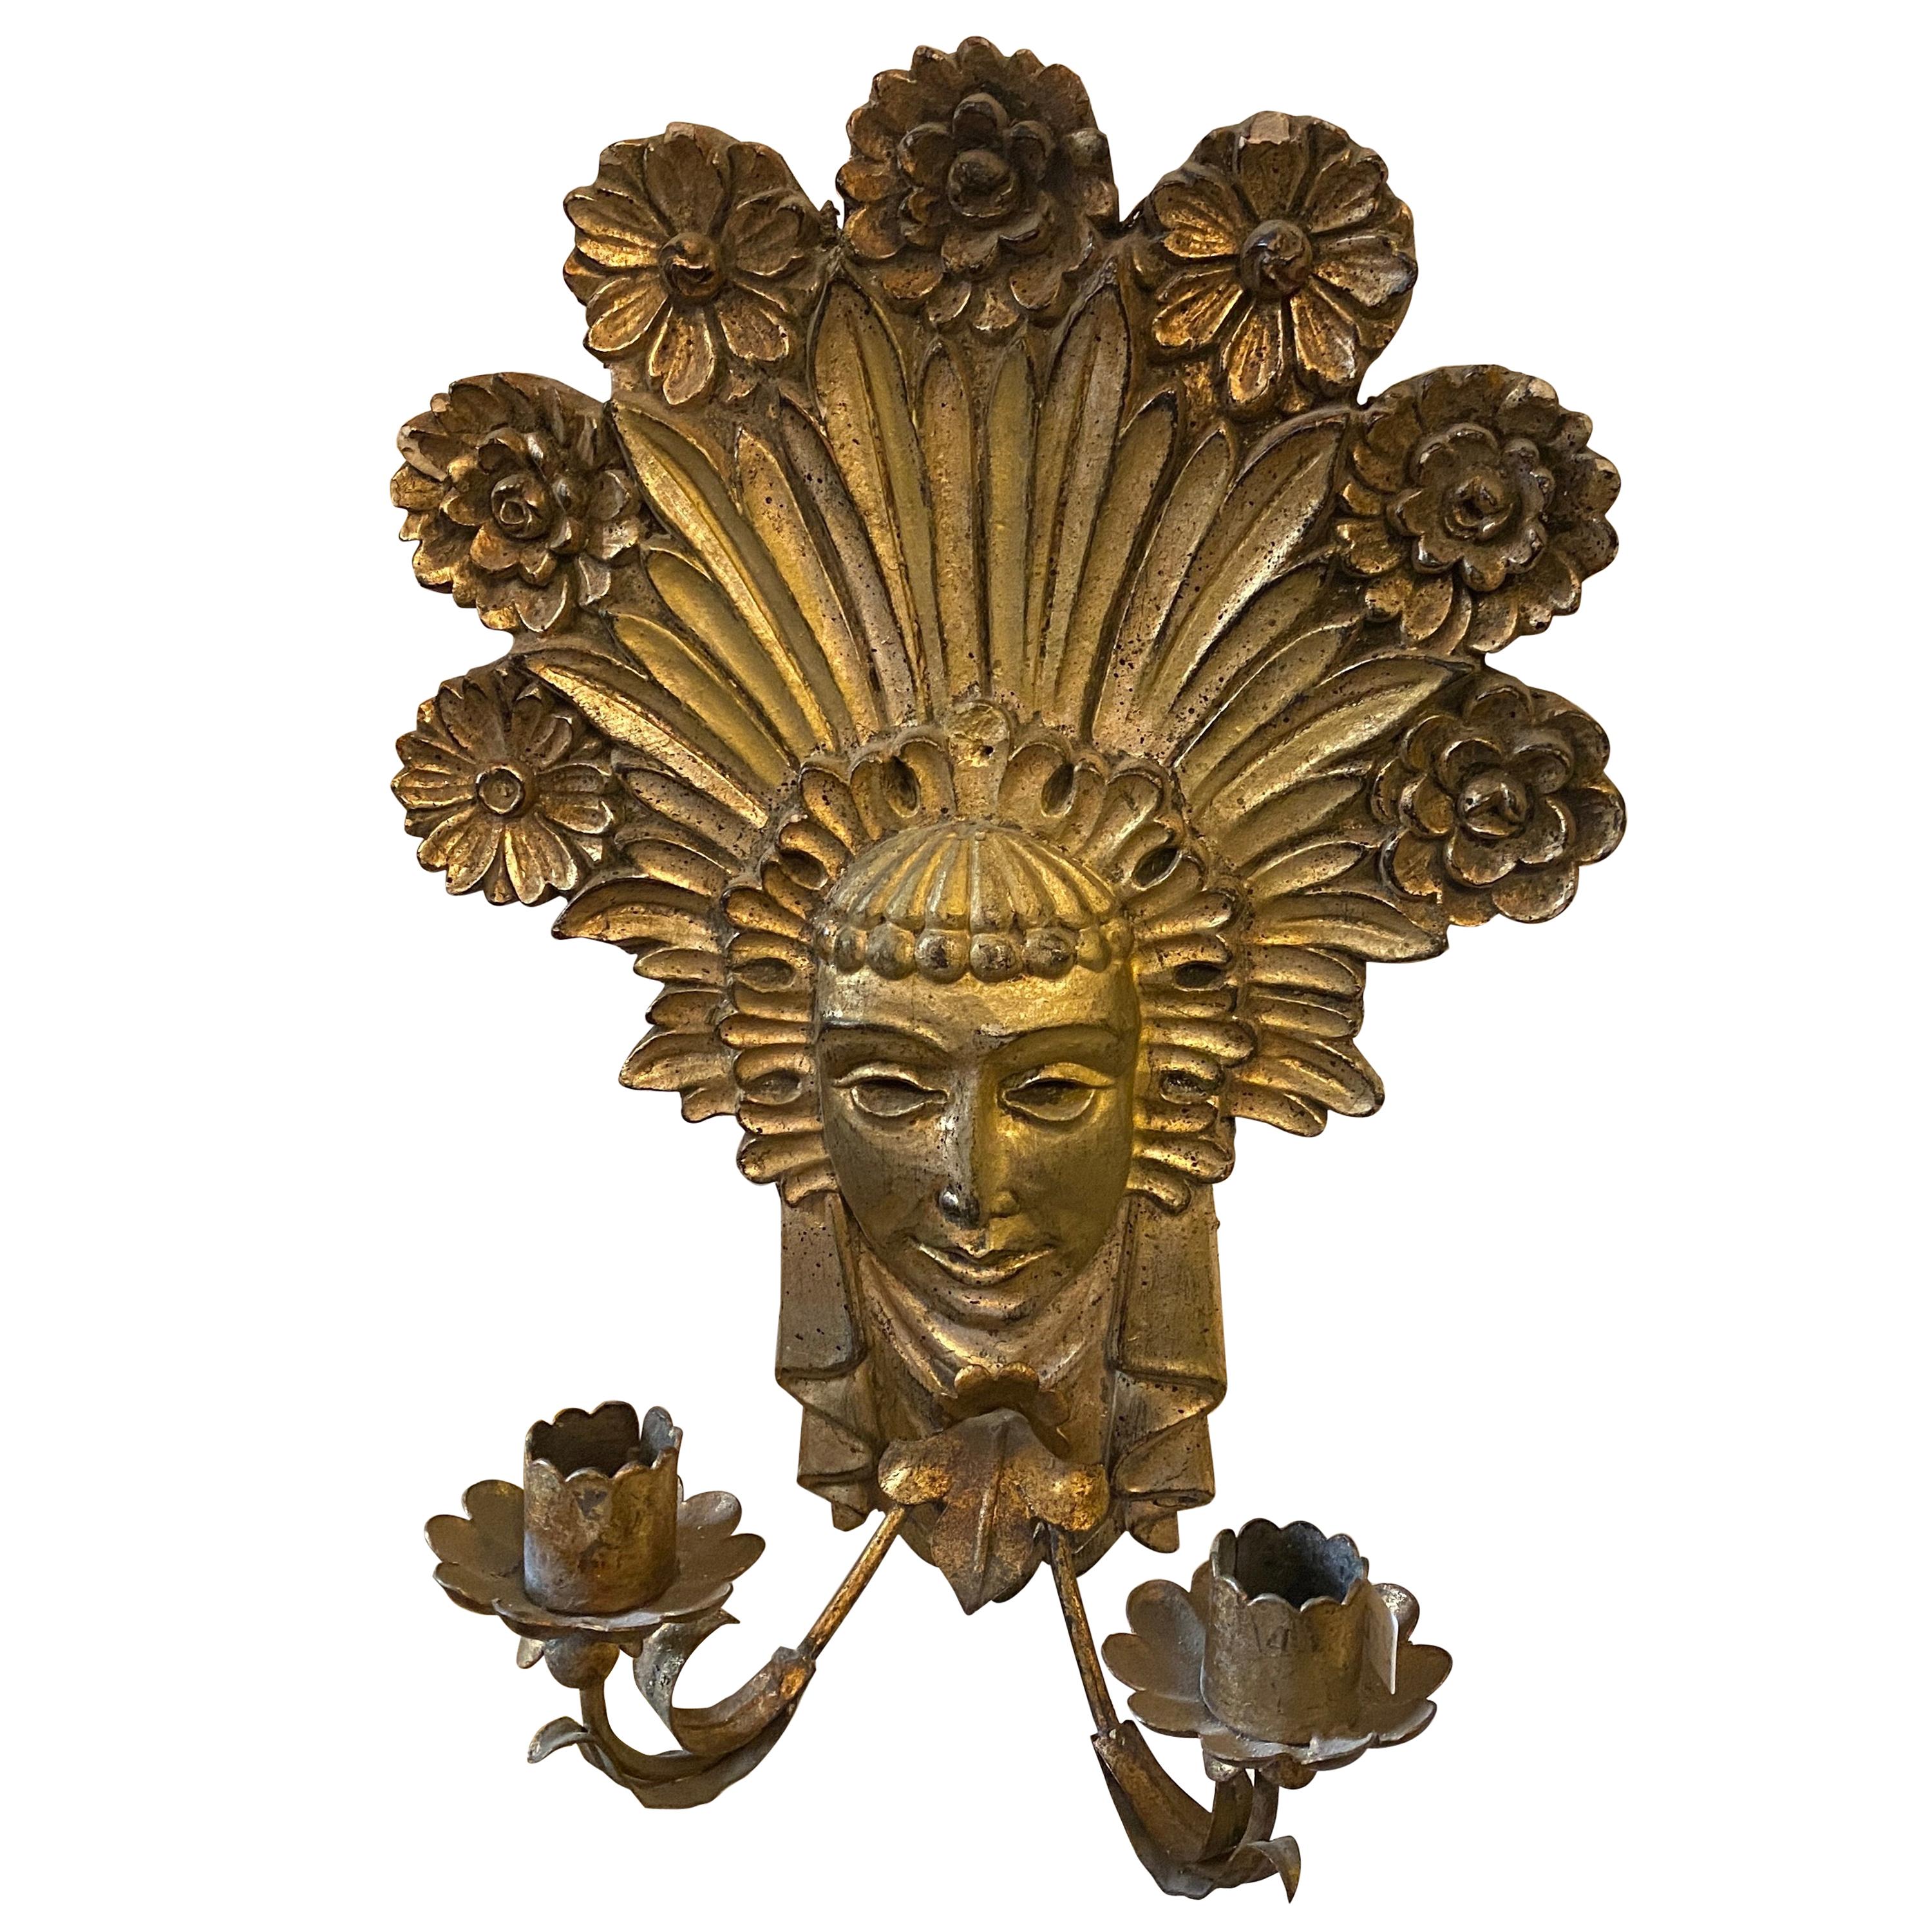 1900 Art Nouveau Gilded Wood and Iron Italian Candle Sconce